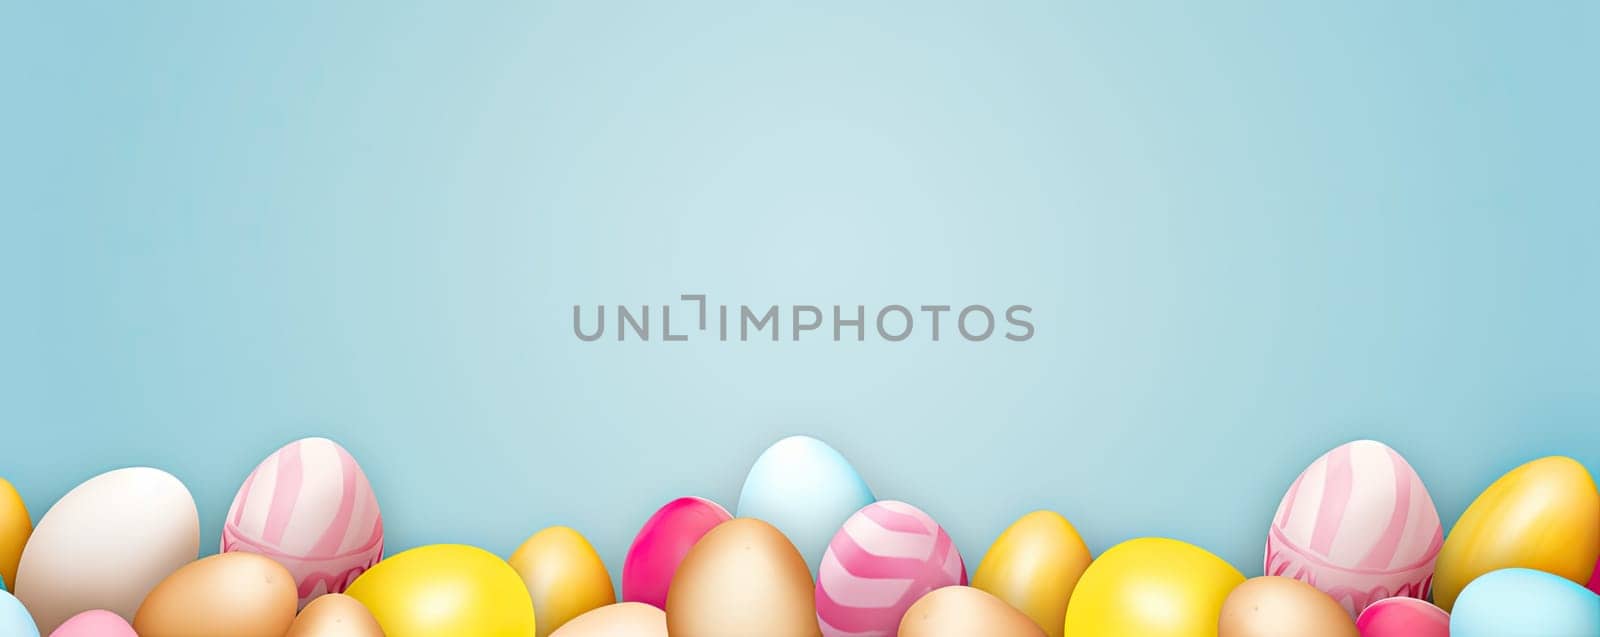 Colorful Easter eggs arranged in banner style on a bright blue background create a festive and bright composition for Easter celebration concepts.